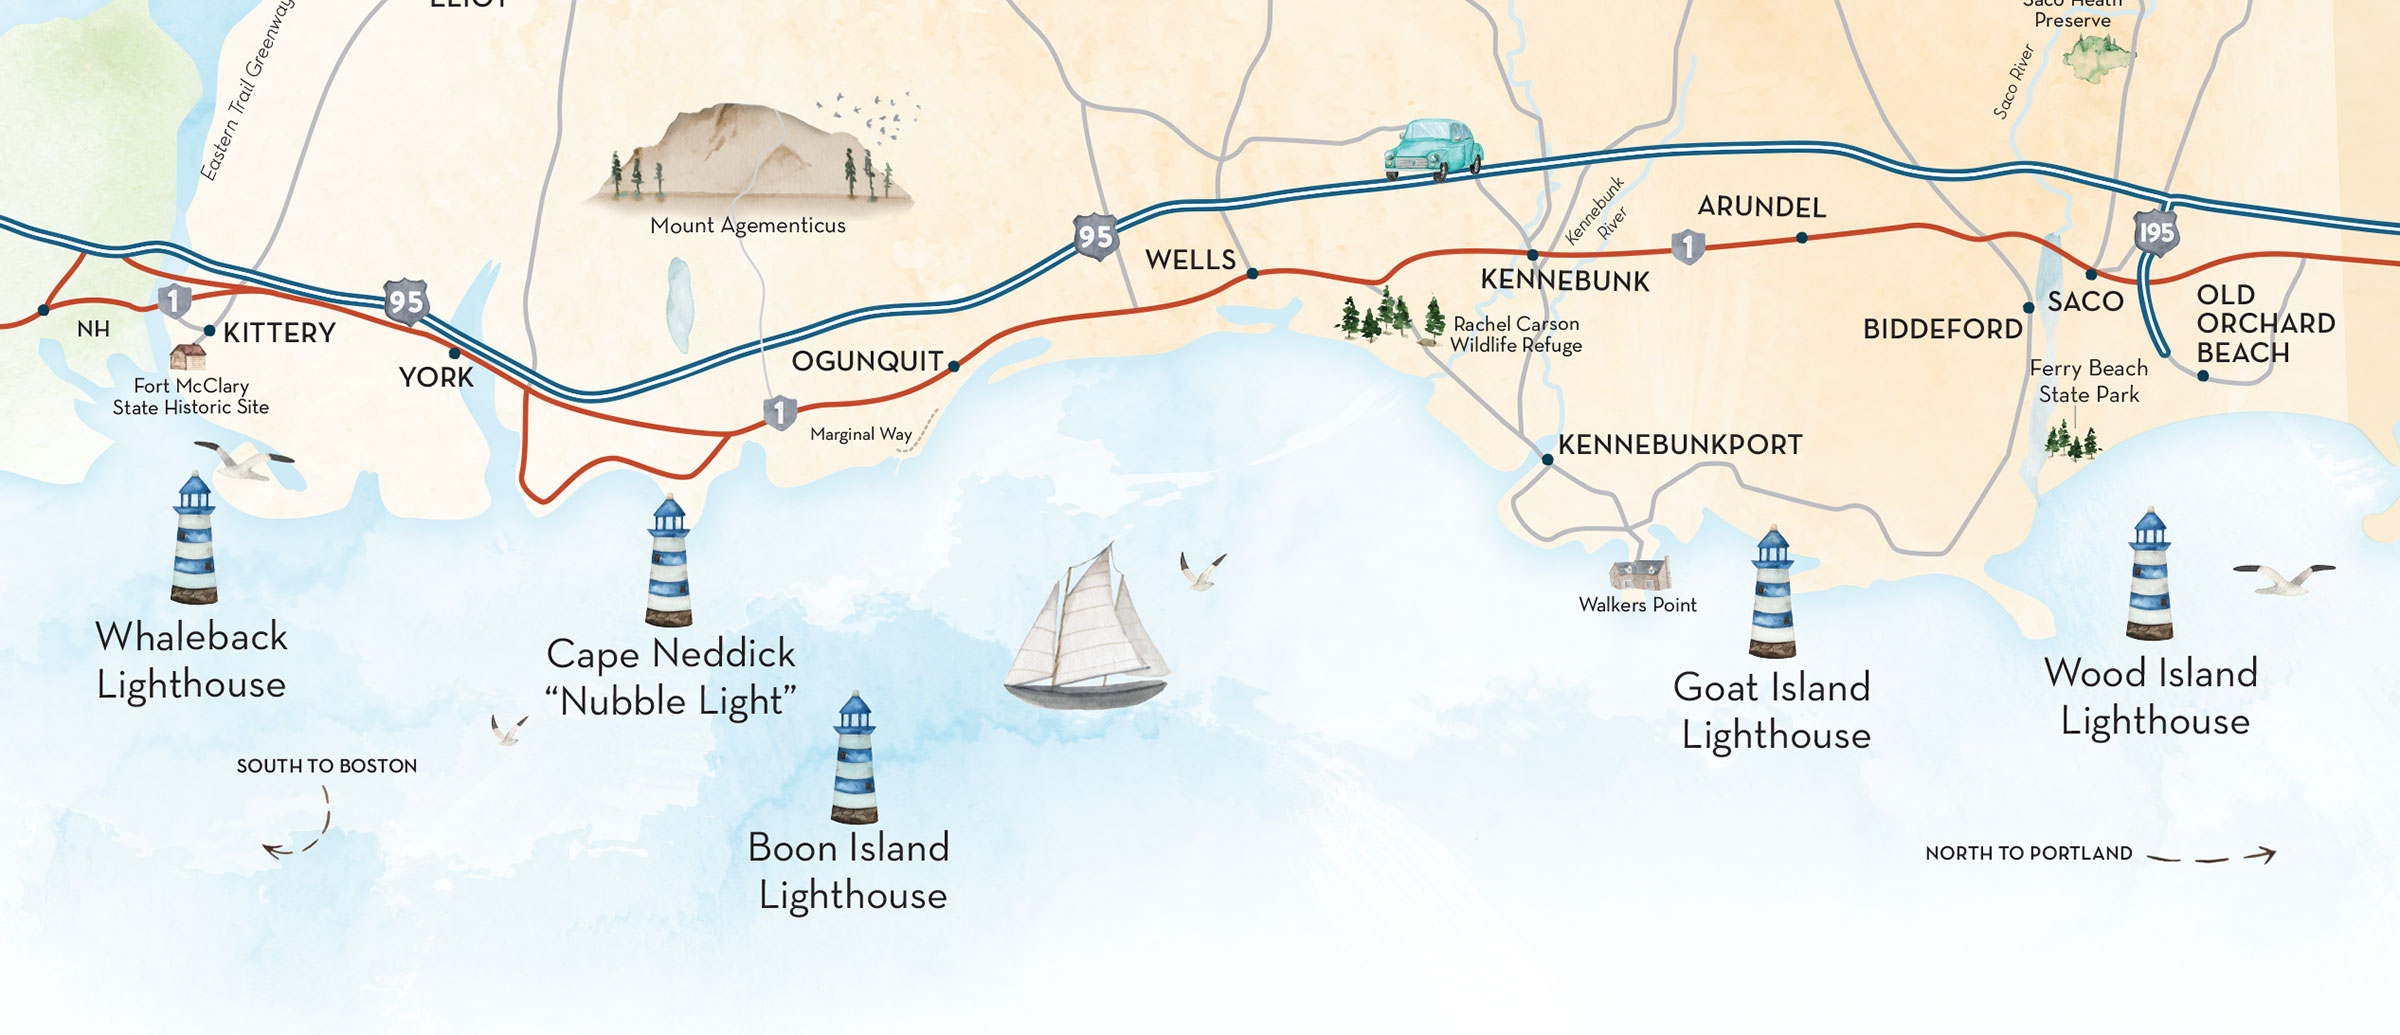 Map ofLighthouses in Maine Beaches Area